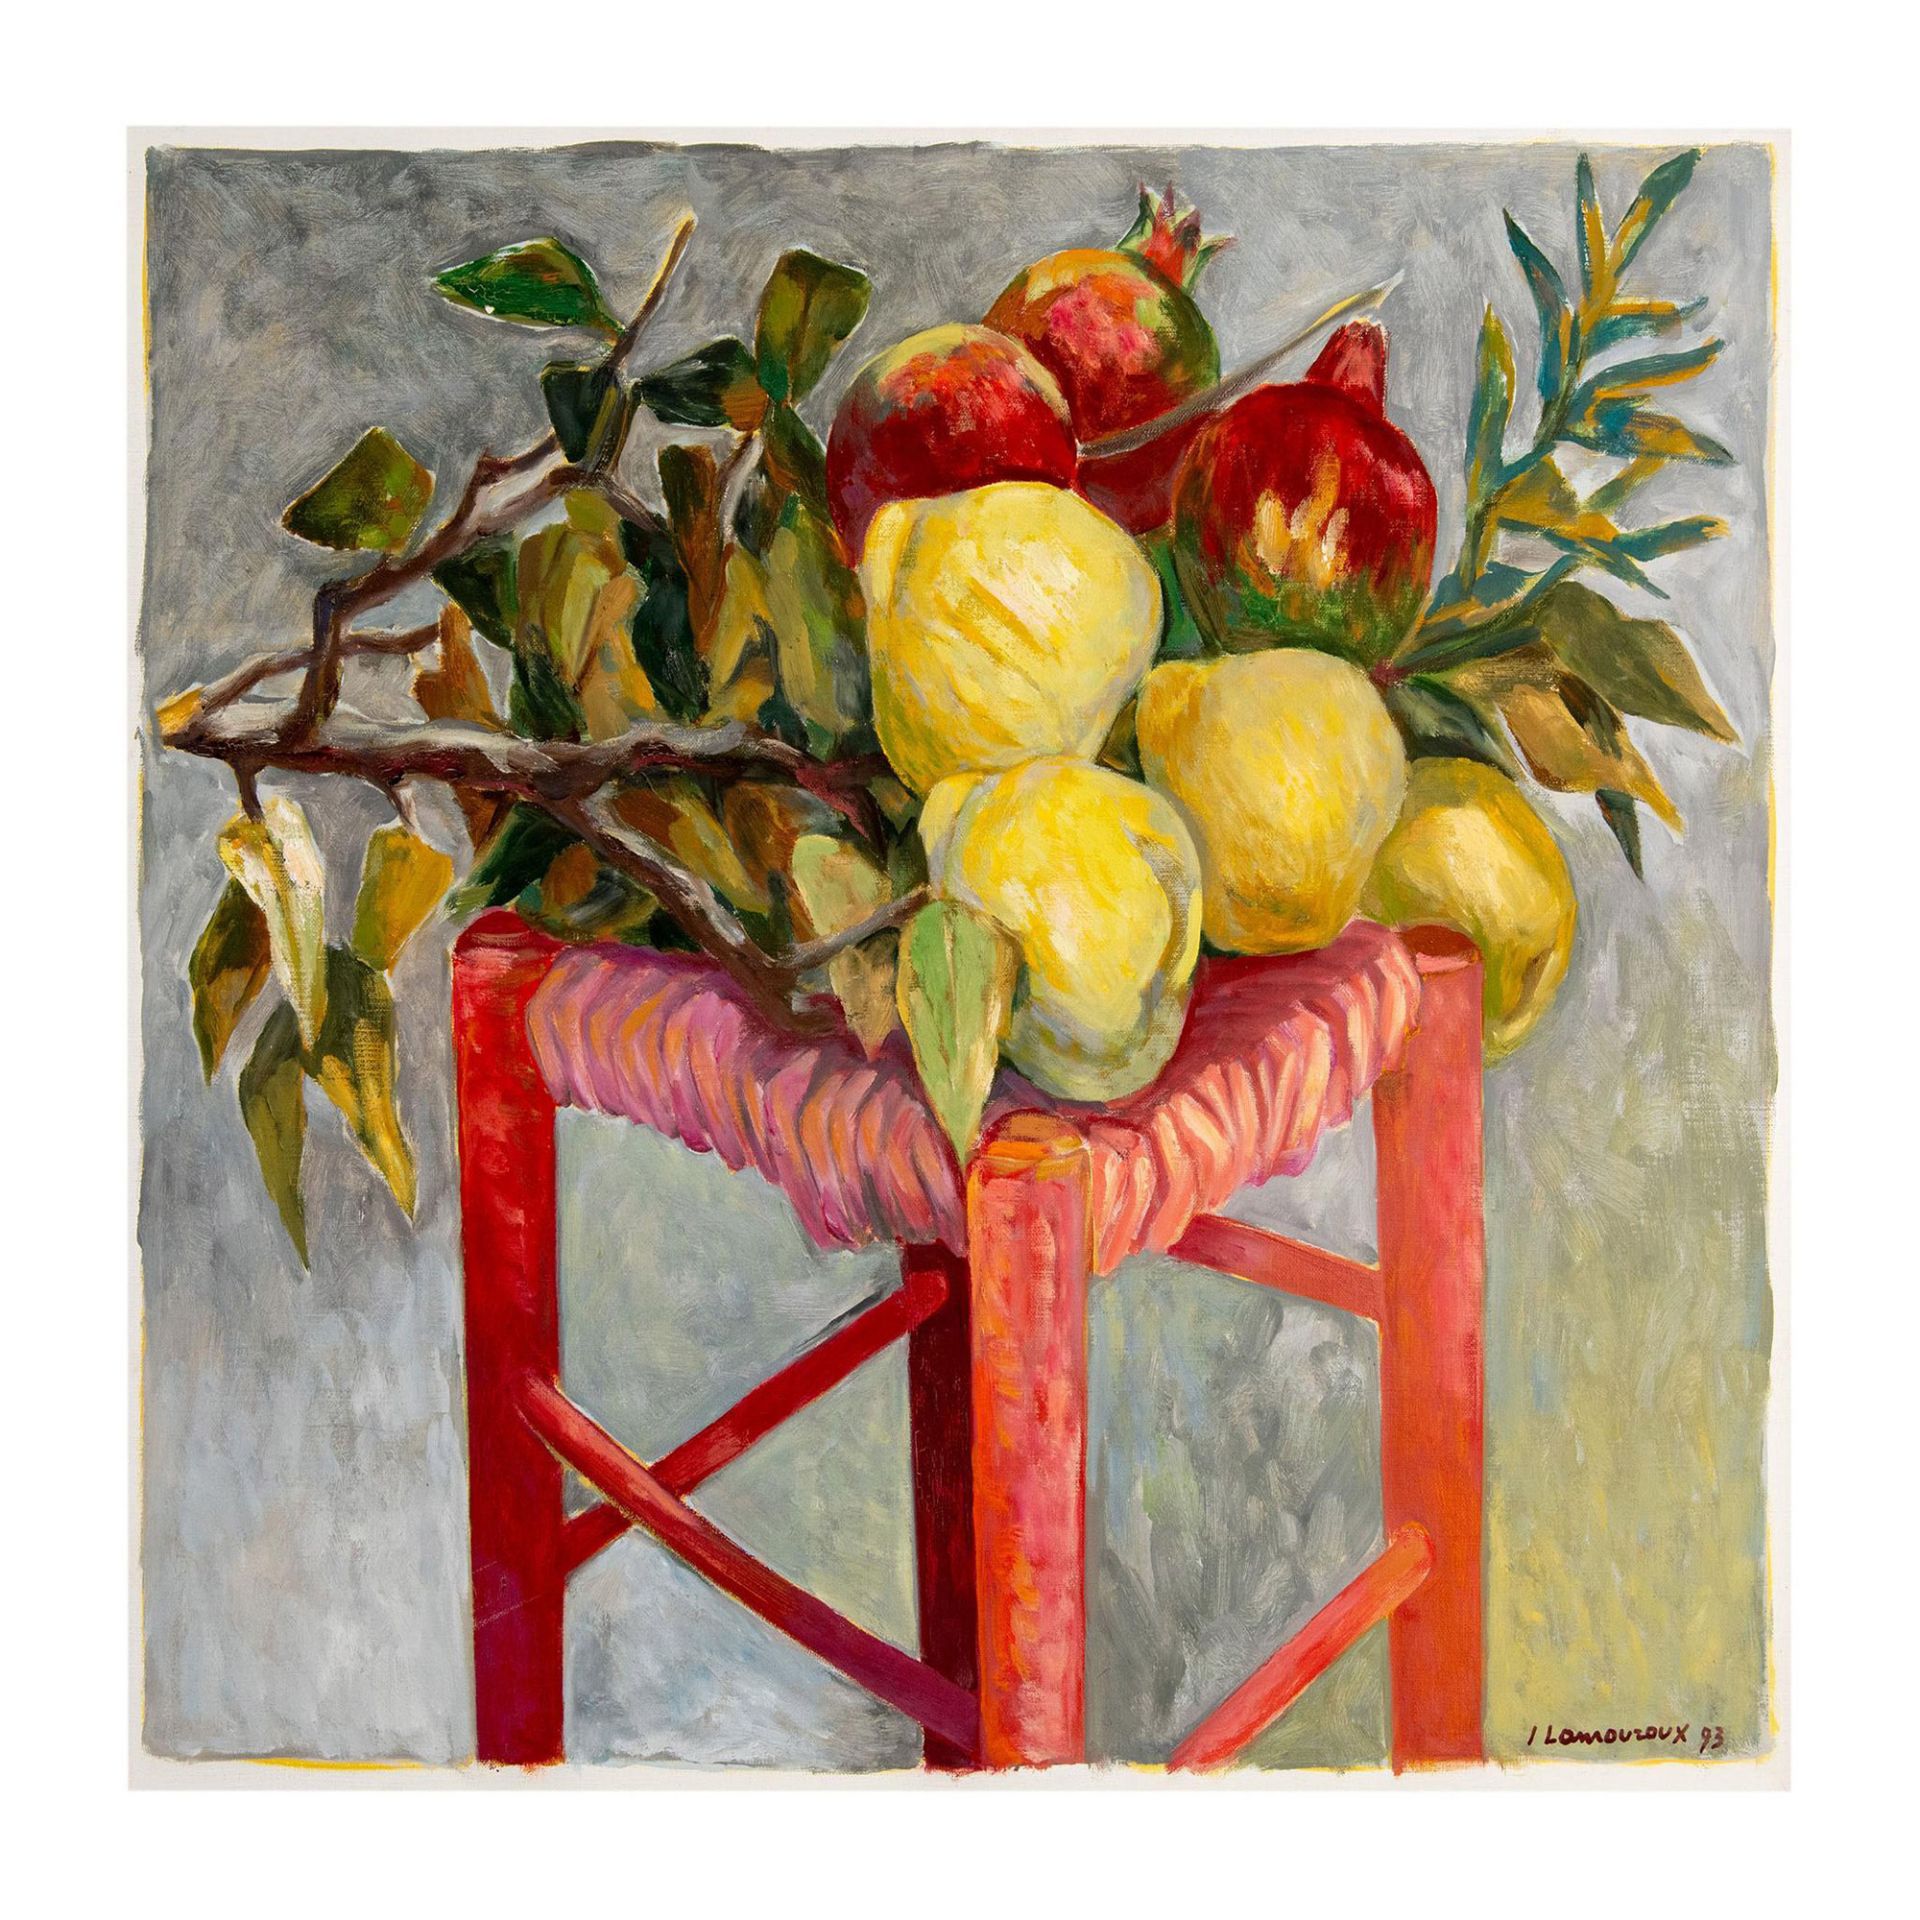 Jean Lamouroux, Original Oil on Canvas, Still Life, Signed - Image 2 of 5